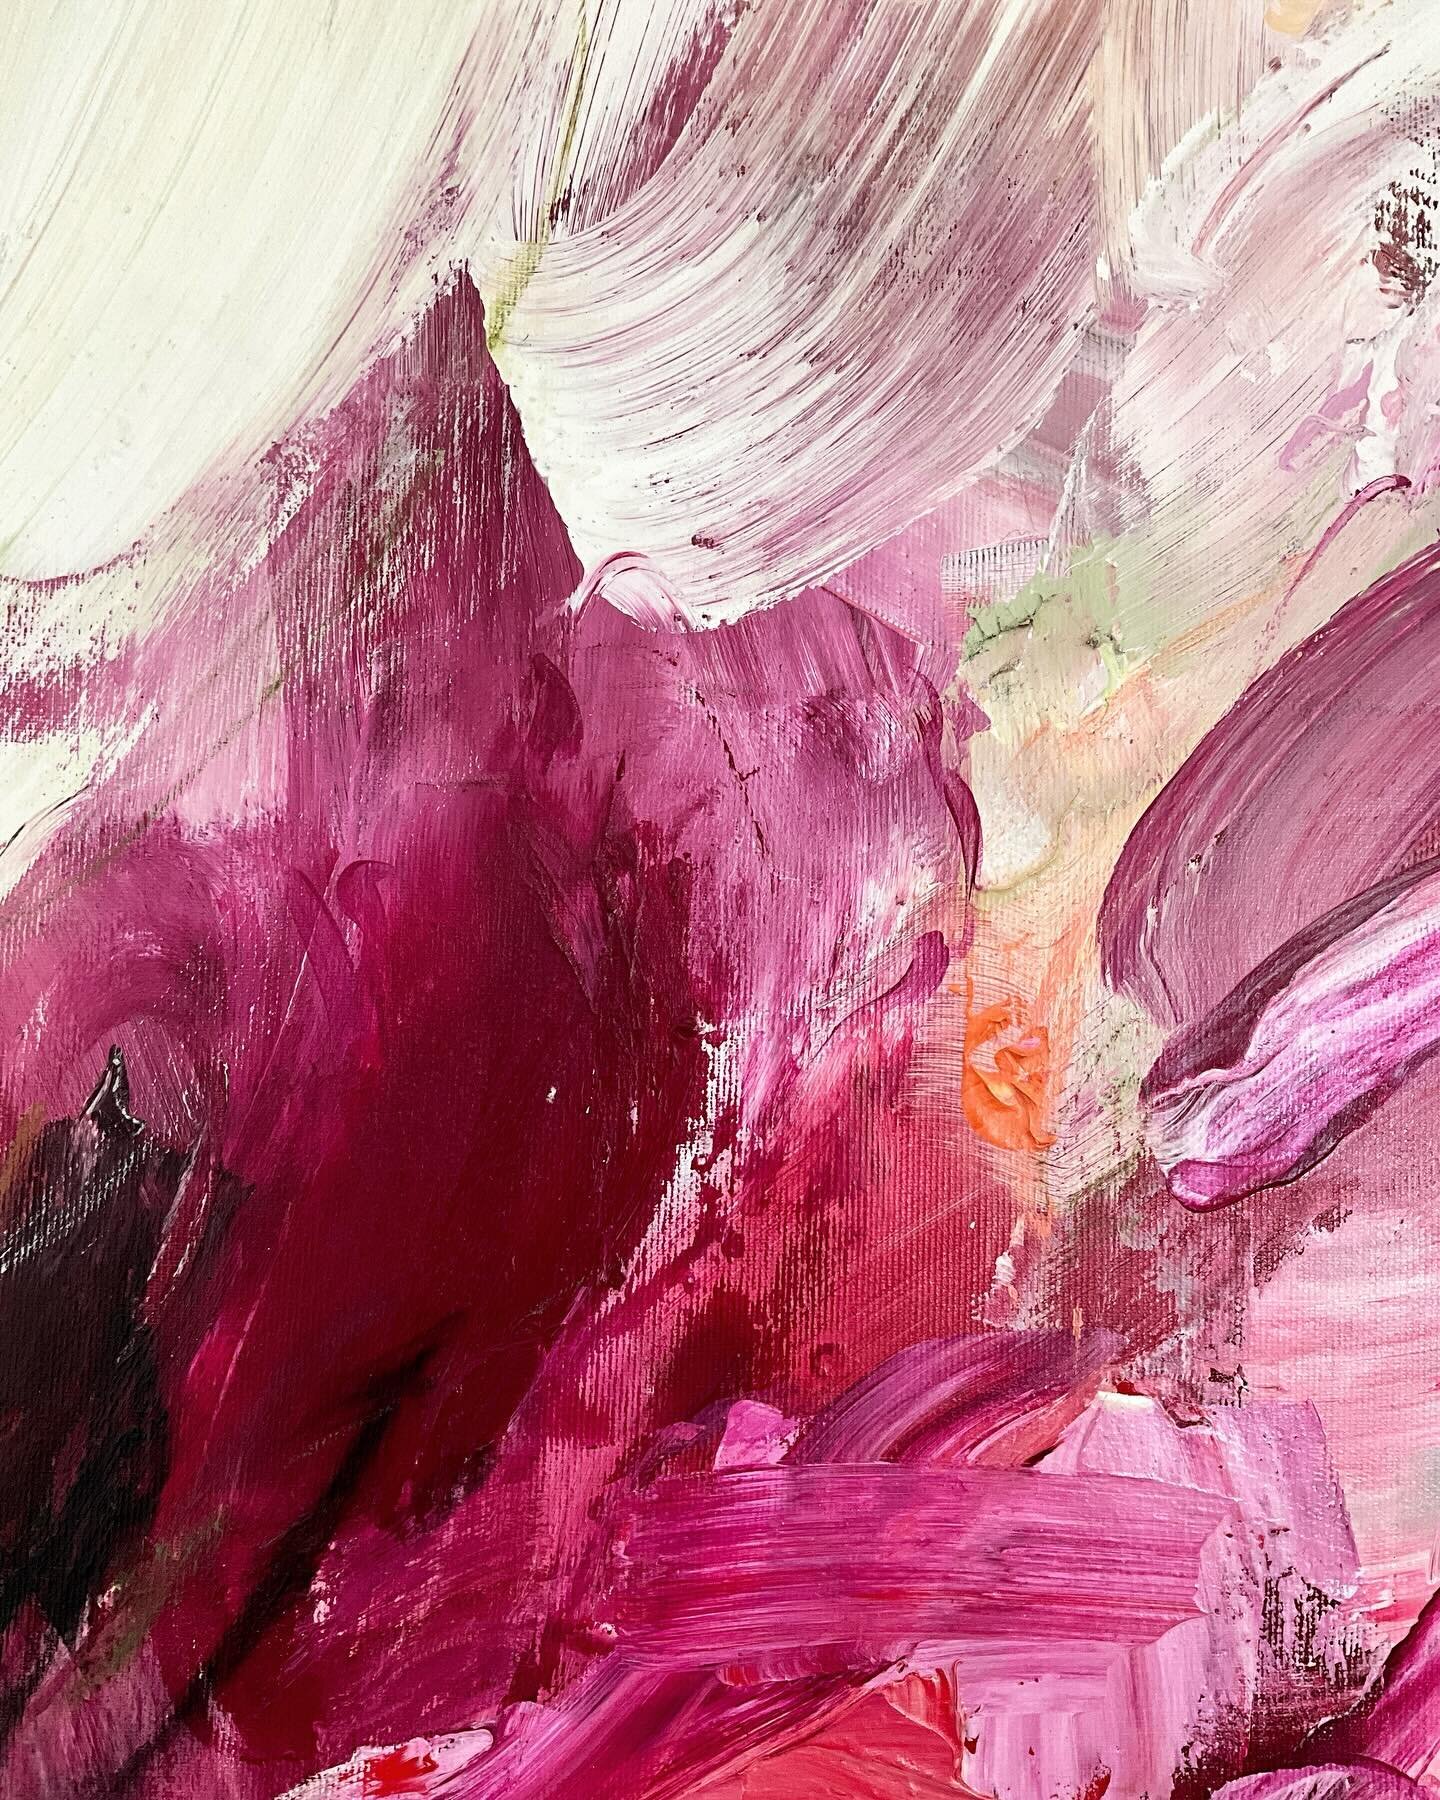 5 days until Art SG 2024! 

Detail shot of [Peony]
Acrylic, aquarelle pastel, cold wax on canvas 
H150 x W112

Art SG Singapore 

🗓️VIP Preview January 18
Public view January 19-21, 2024

📍 Marina Bay Sands

💫Booth BE11
A Lighthouse Called Kanata
